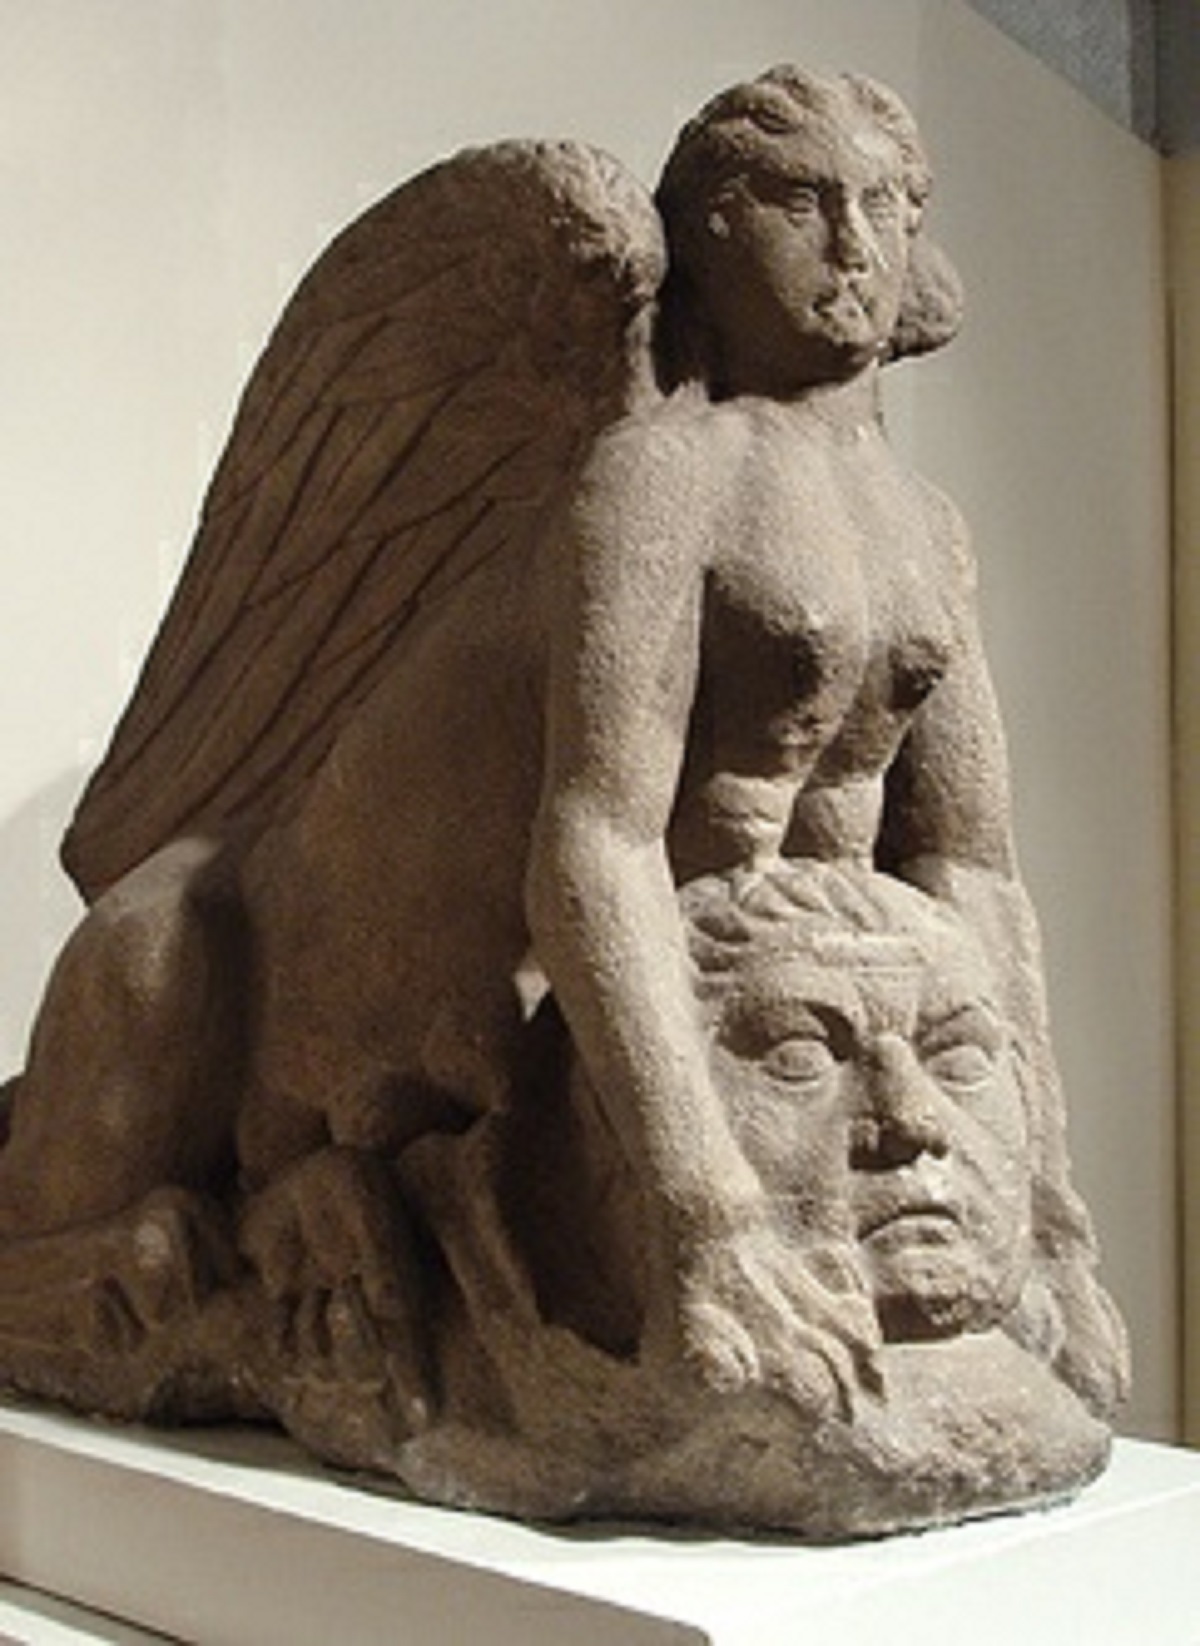 The Colchester Sphinx